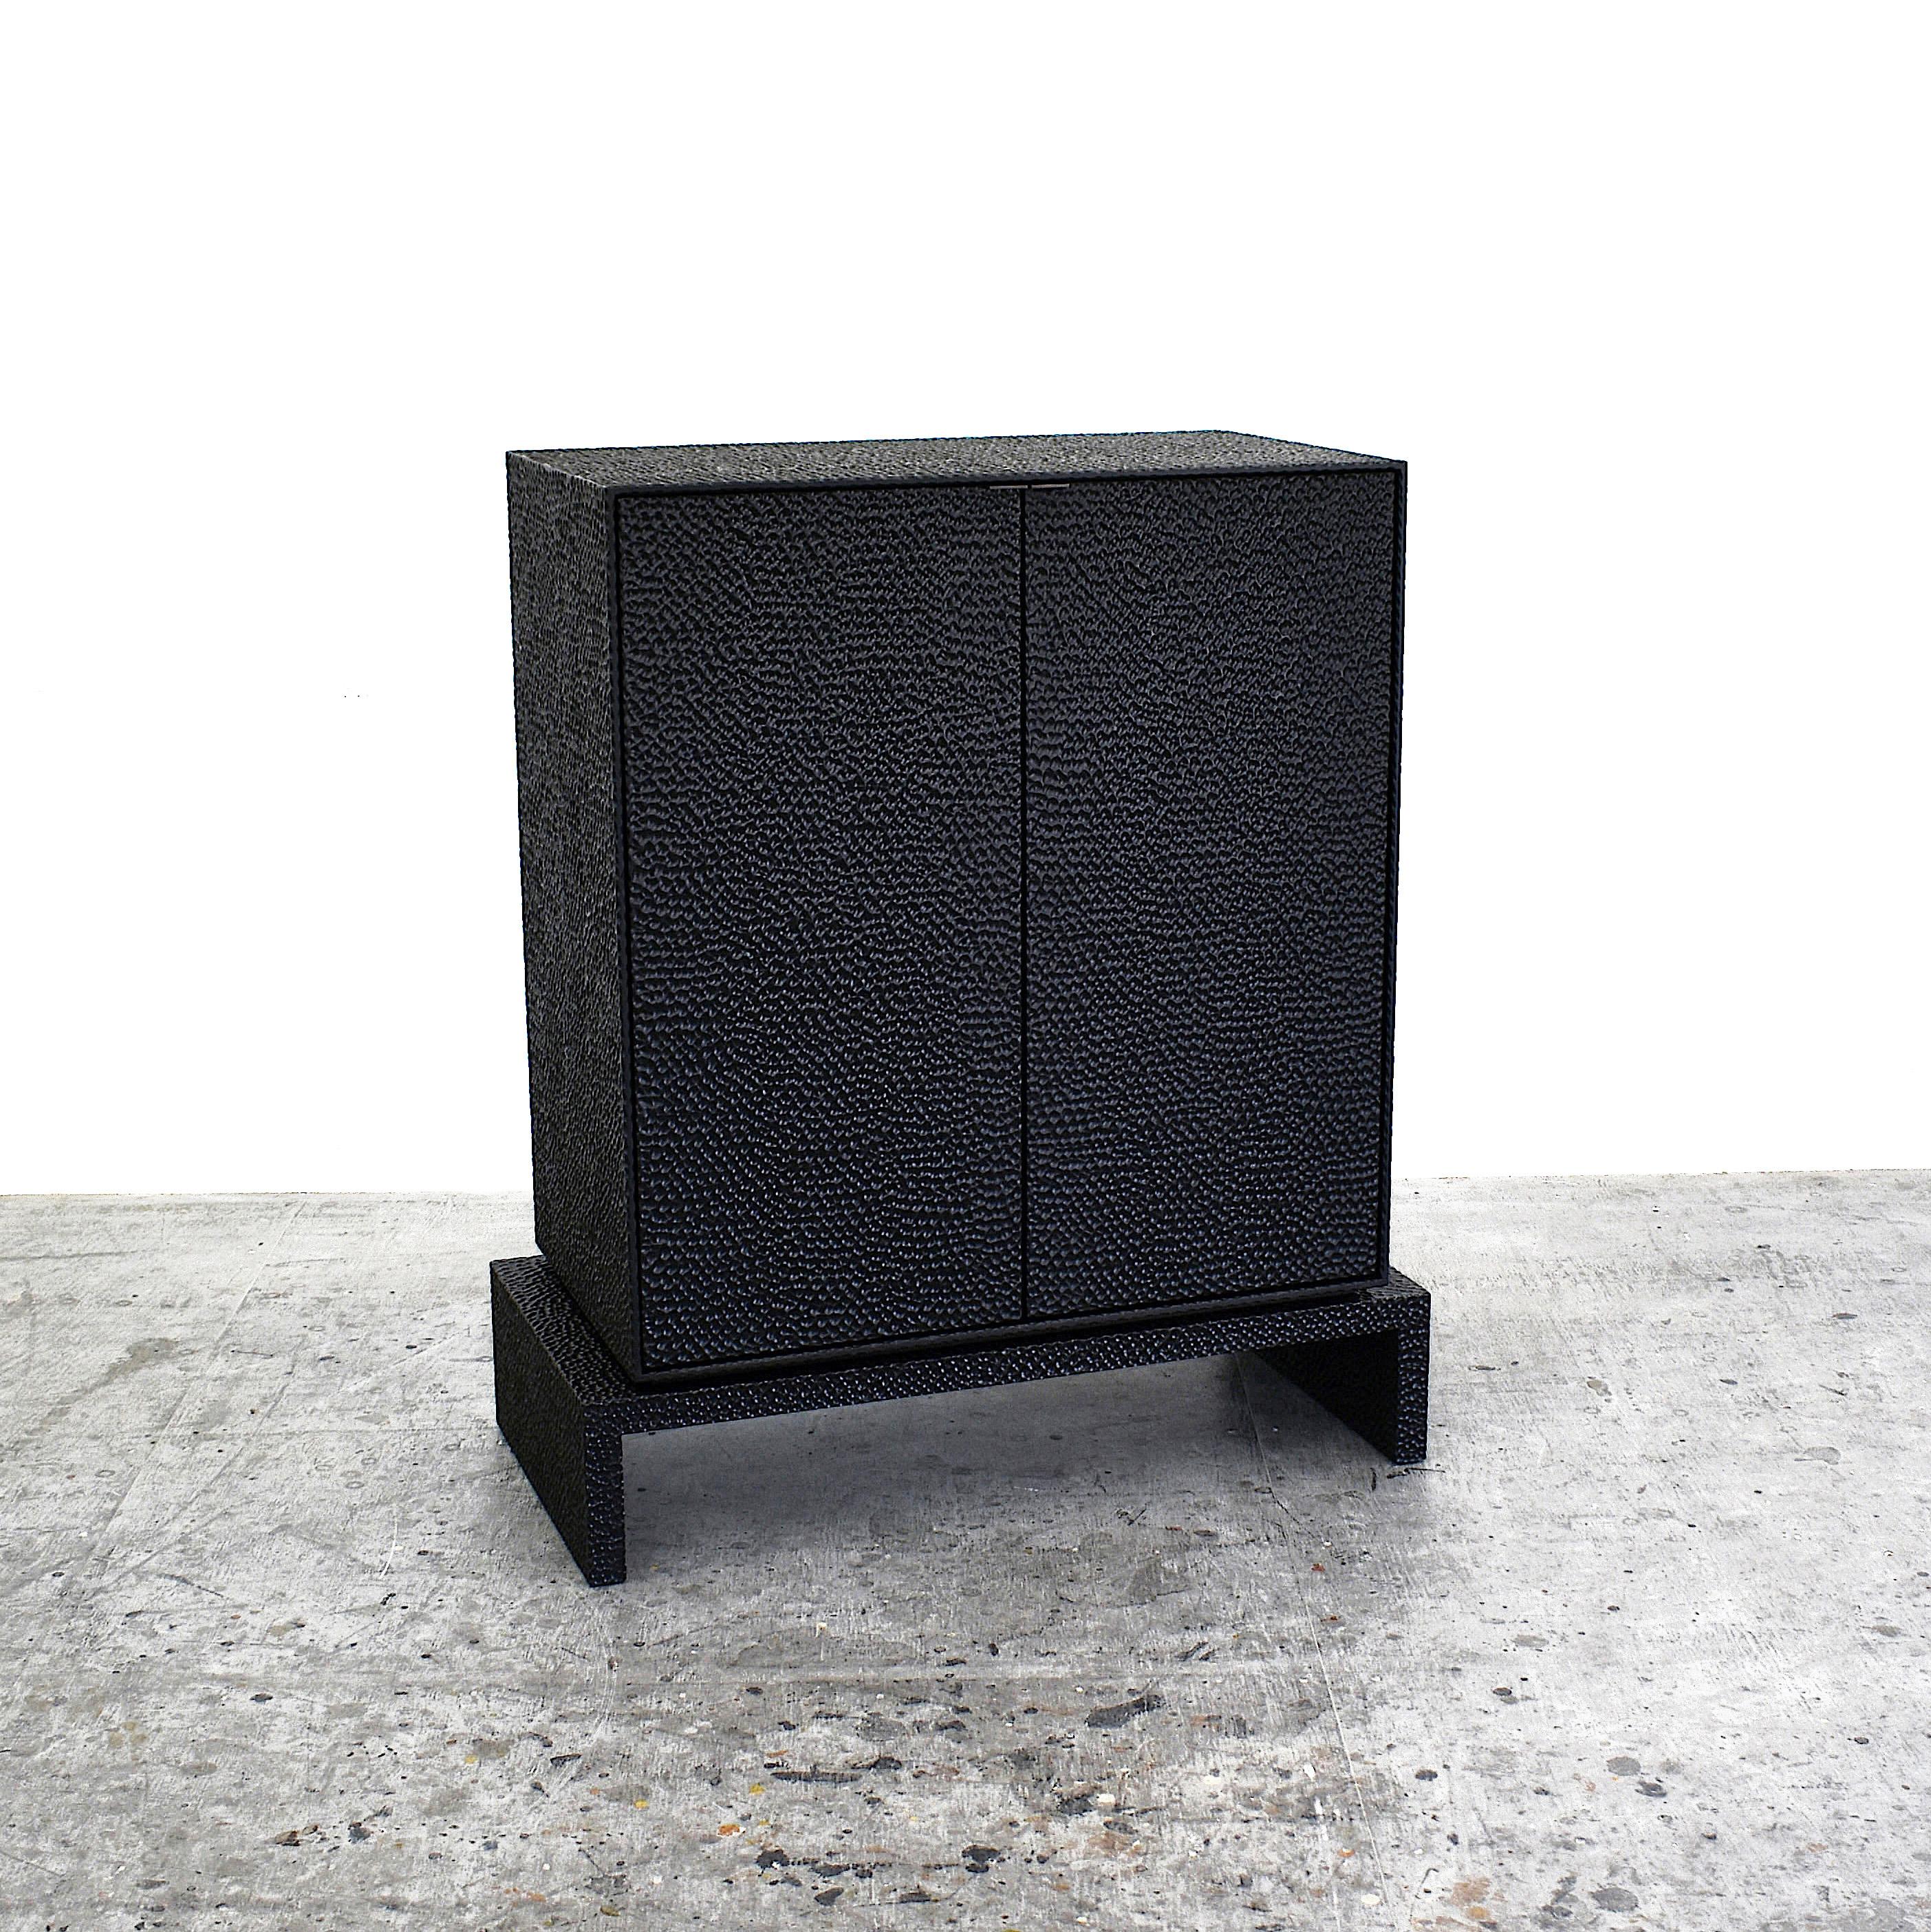 V2 cabinet sculpted by John Eric Byers
Dimensions: 106.7 x 91.5 x 45.7 cm
Materials: carved blackened maple and brass

All works are individually handmade to order.

John Eric Byers creates geometrically inspired pieces that are minimal,